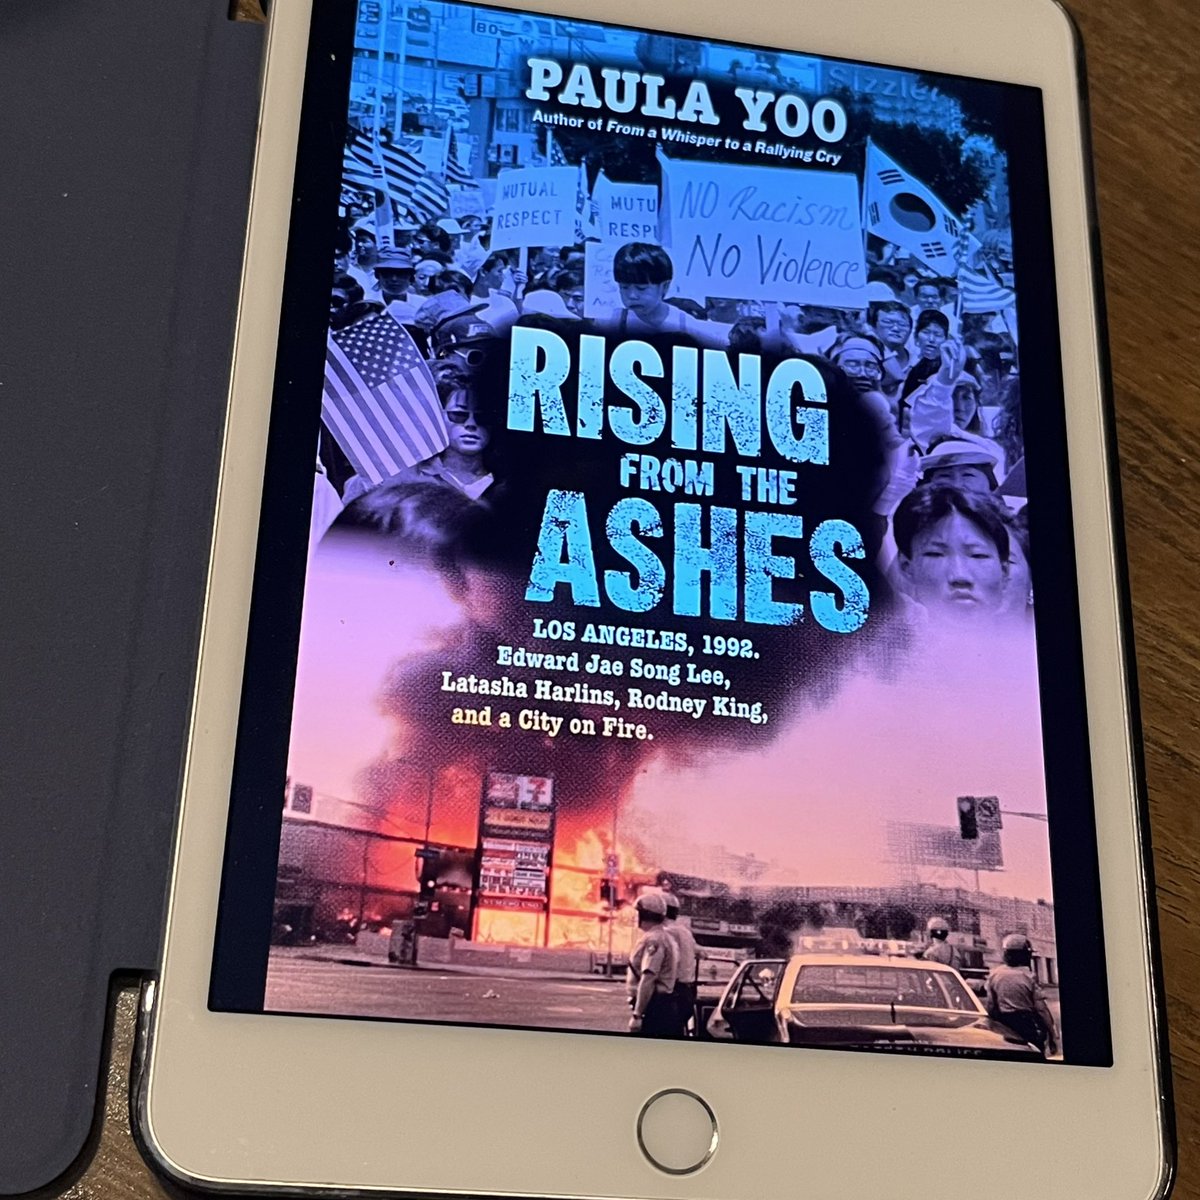 .@paulayoo is an incredible writer. She is dedicated to her work. Her nonfiction books are fully-researched & important. I’m thankful to know her & her work. Congrats on her new book release! I’m looking forward starting to read with my Kindle ebook copy & soon with my paperback.